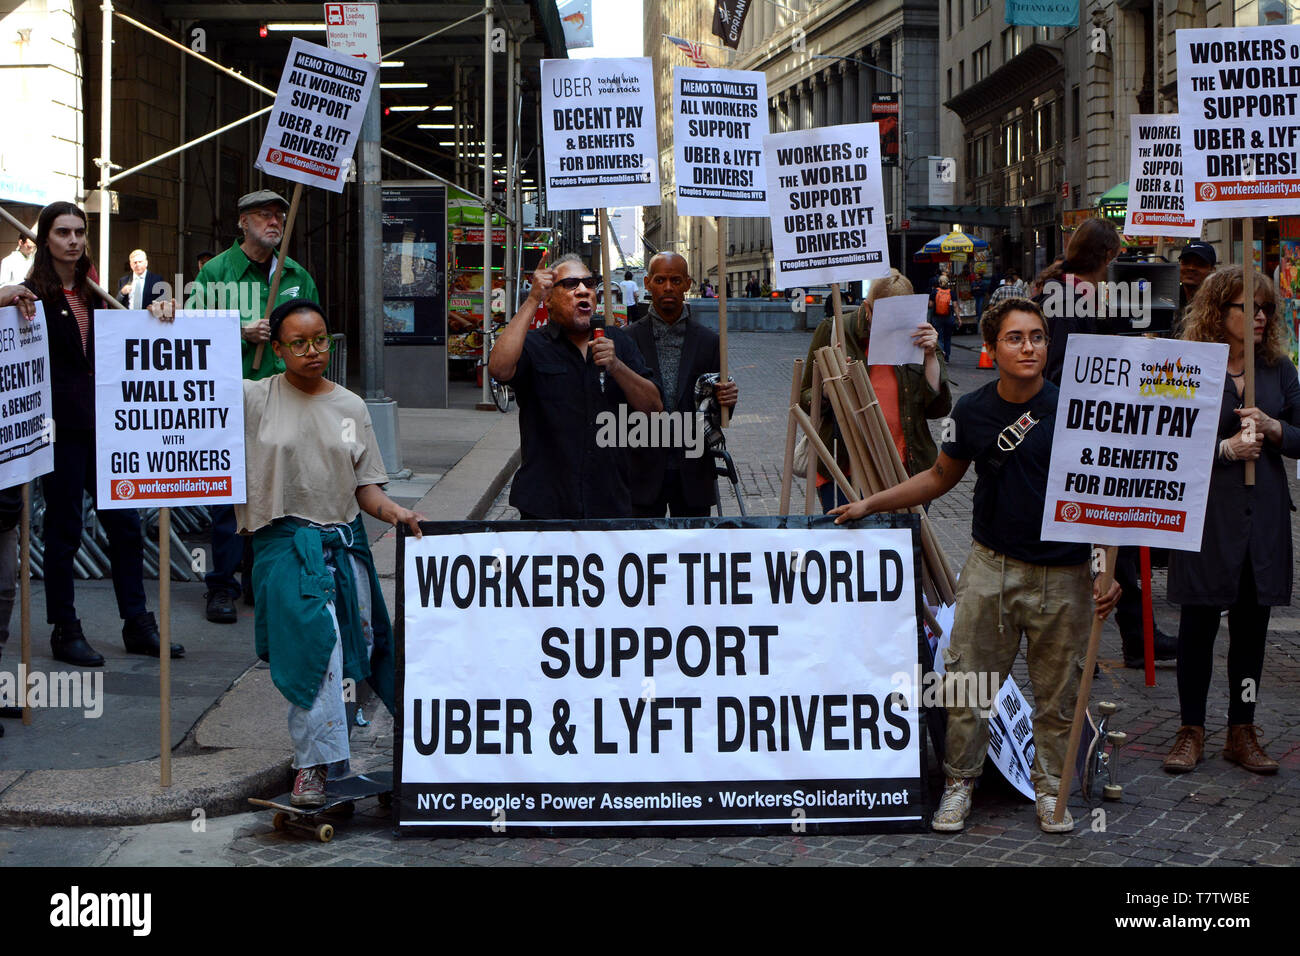 Uber and Lyft Drivers With Signs on Strike and Protesting Outside the New York Stock Exchange at 26 Wall Street In New York, NY, USA on May 8th, 2019 Stock Photo